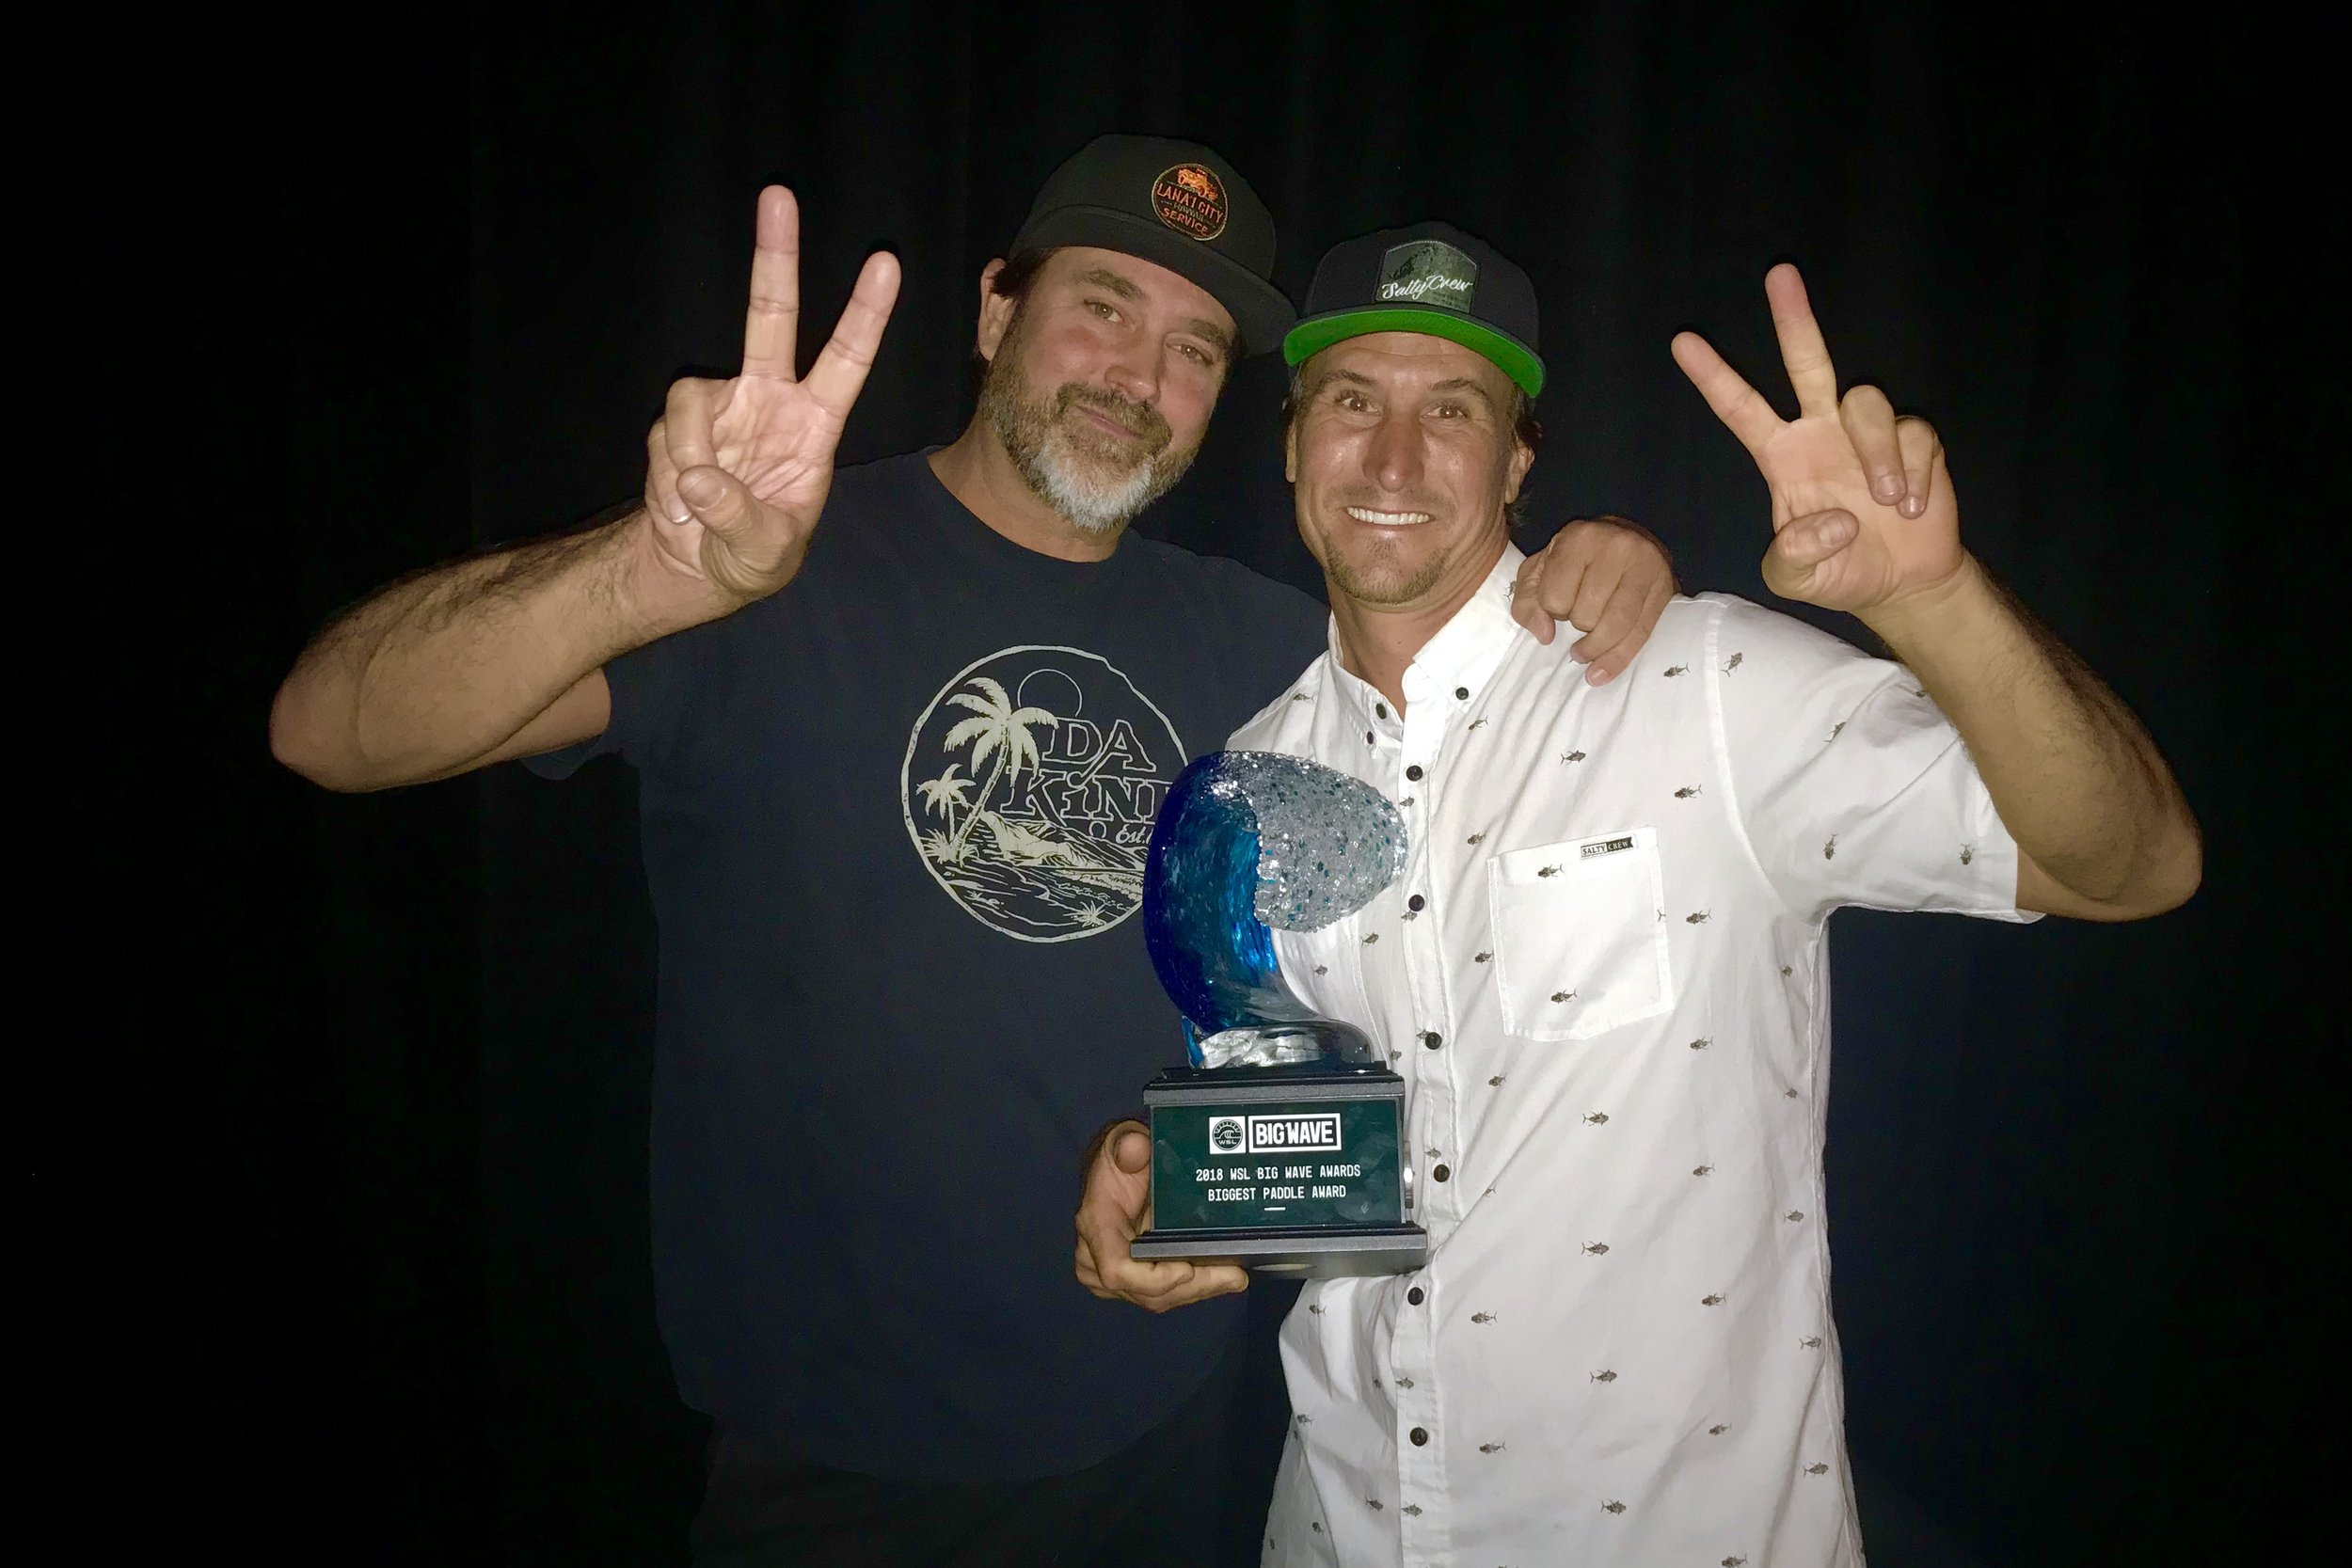 April 28, 2018 - WSL Big Wave Awards - Photographer Brent Broza & Surfer, Aaron Gold, 2X Award Winners at Jaws in 2016 & 2018